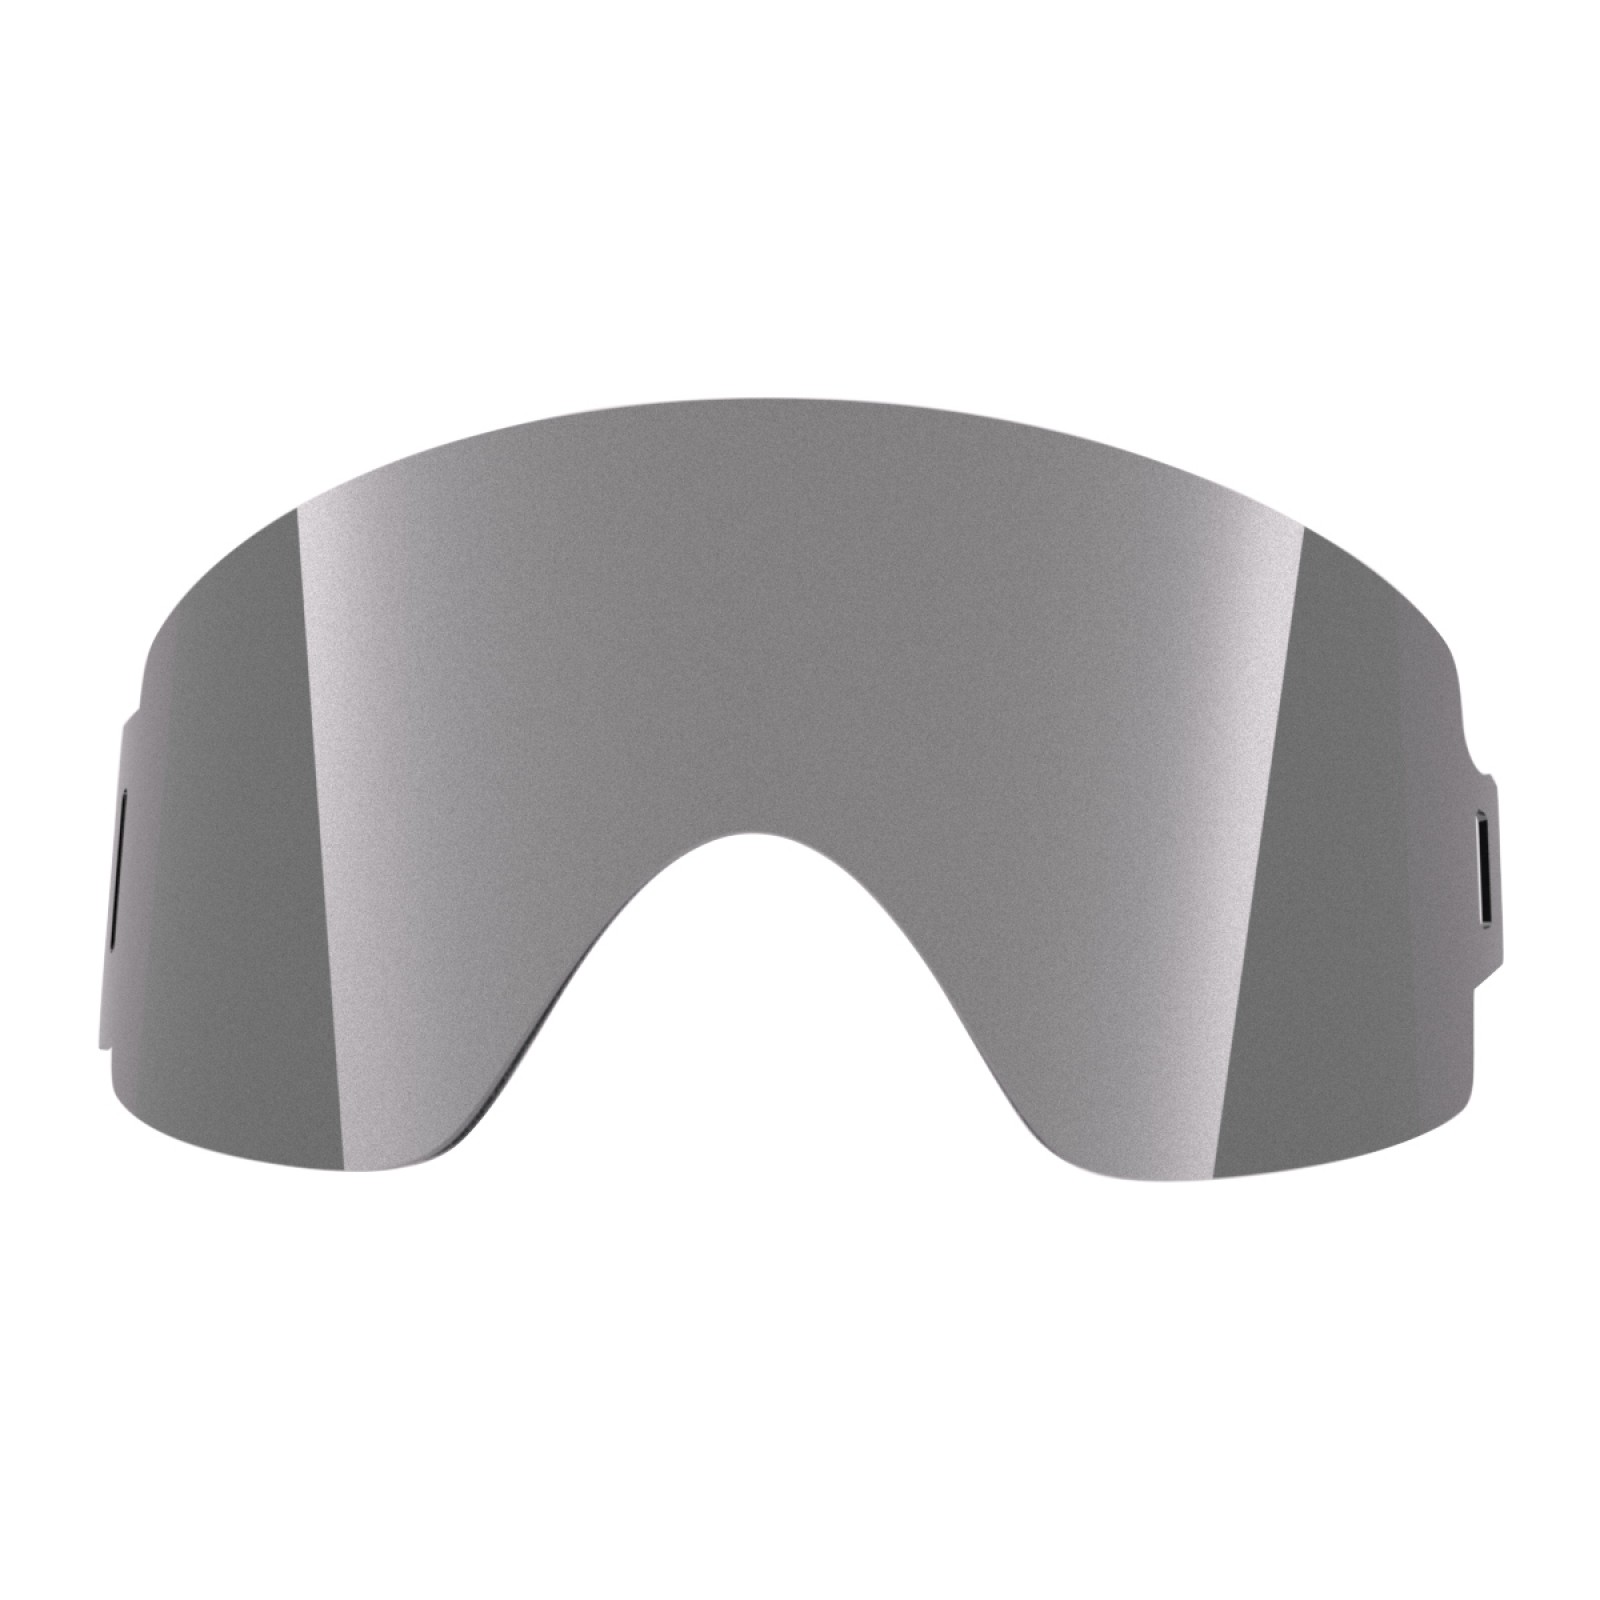 Silver lens for Shift goggle